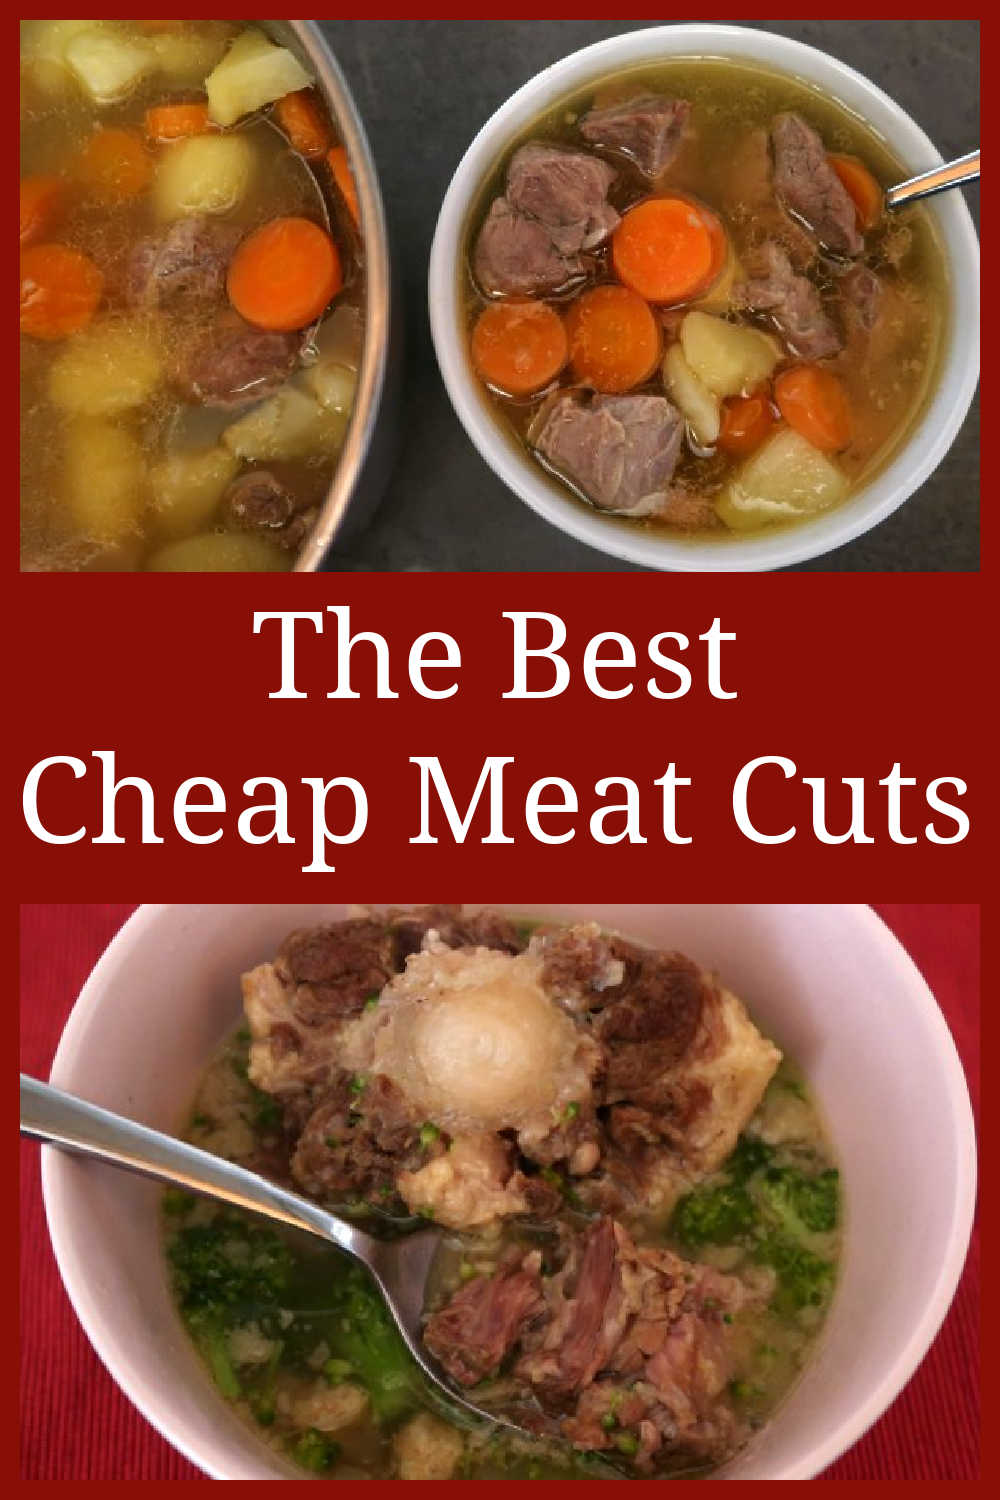 Cheap Meat Cuts - How to shop for the best inexpensive cuts of beef and chicken, plus the cheapest meals so you'll make the most of the simple ingredients.